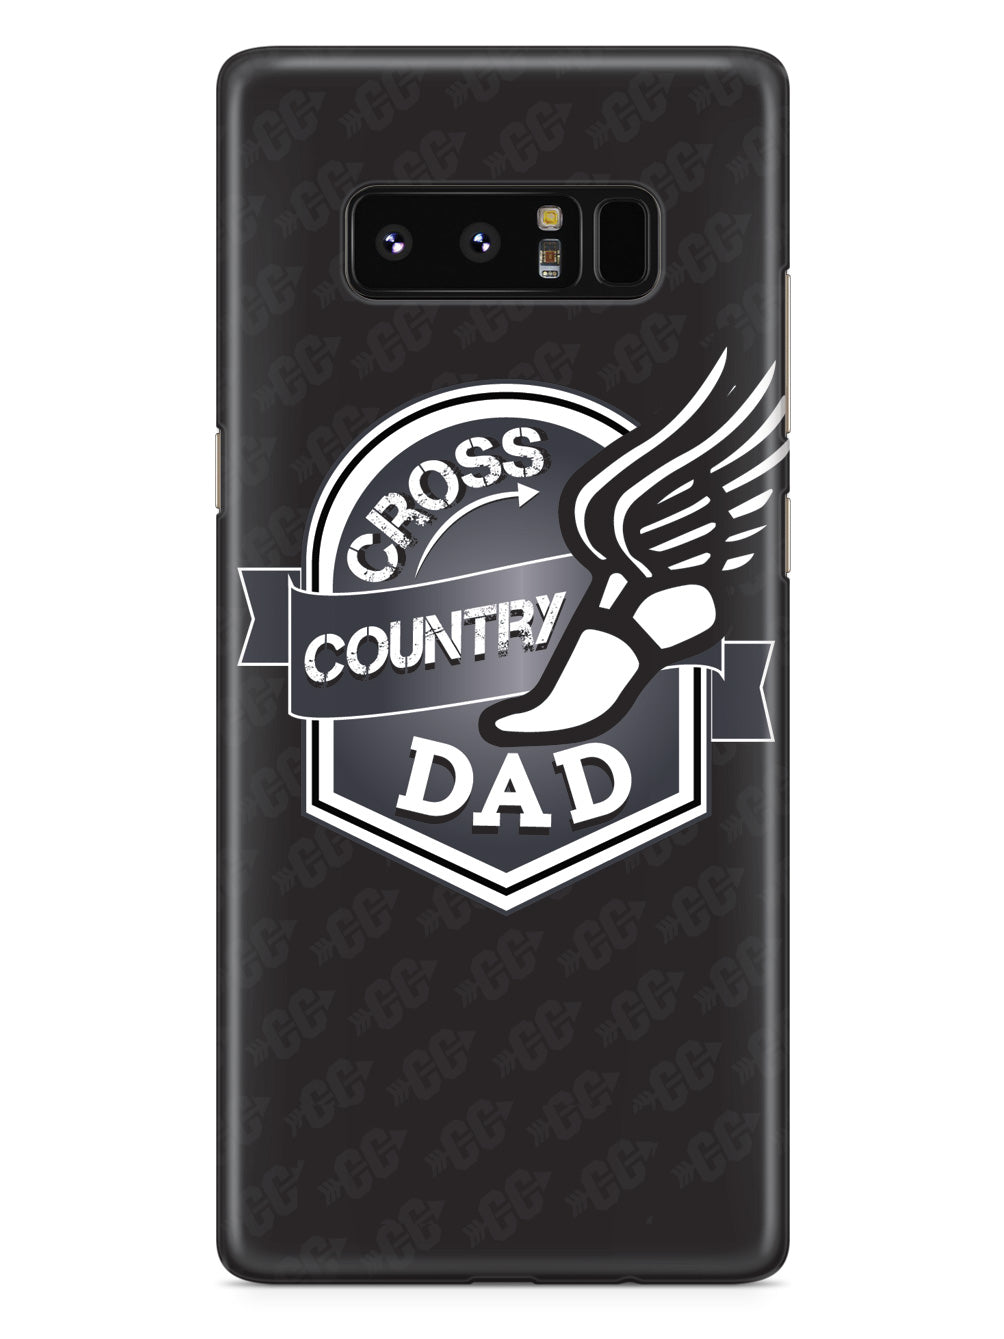 Cross Country Dad Case